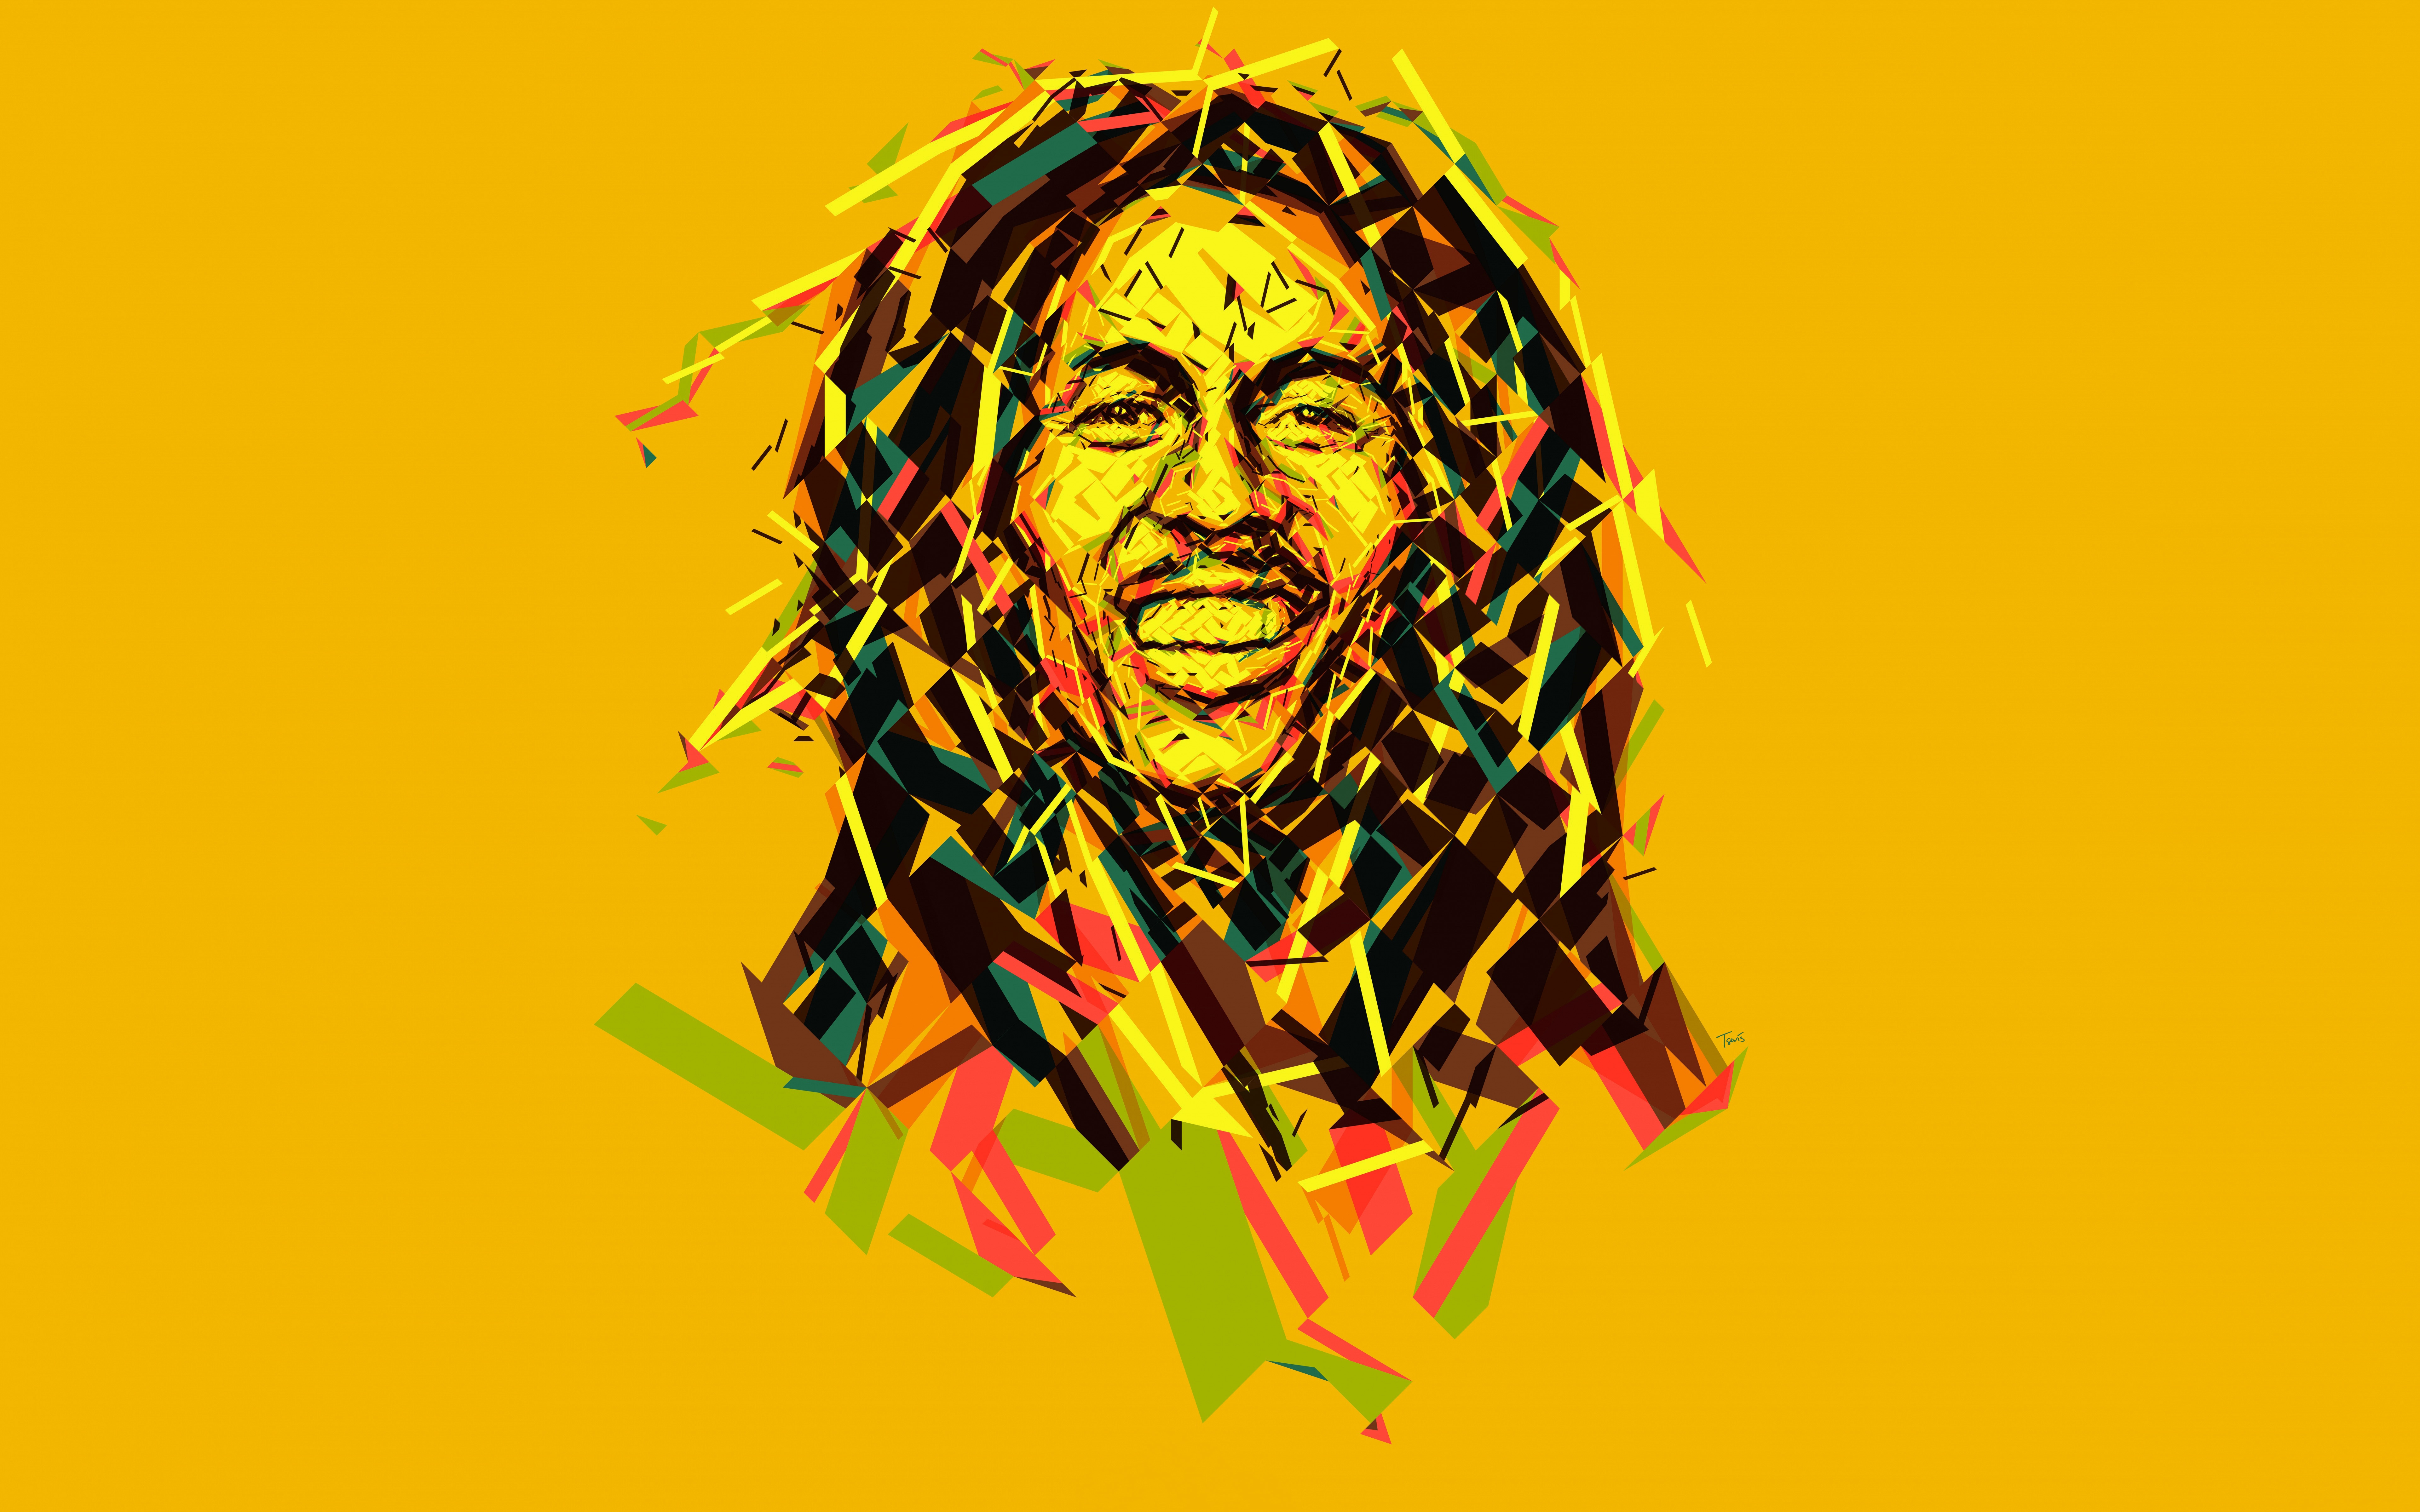 bob marley, music, colors, face, jamaican, singer, smile